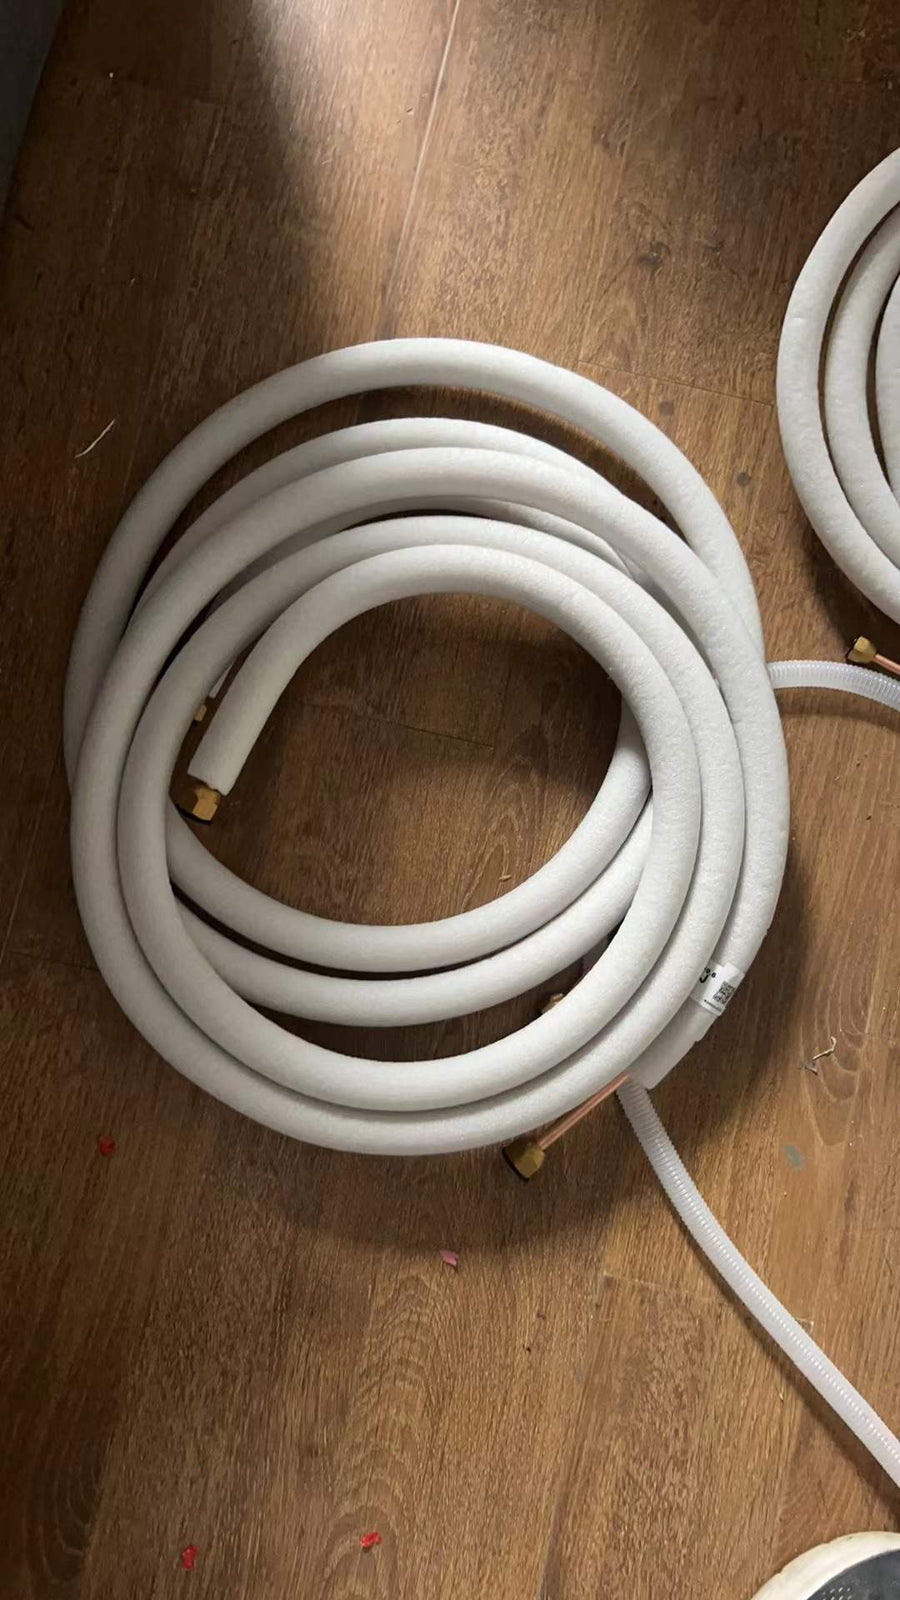 ac pipes for guard shack